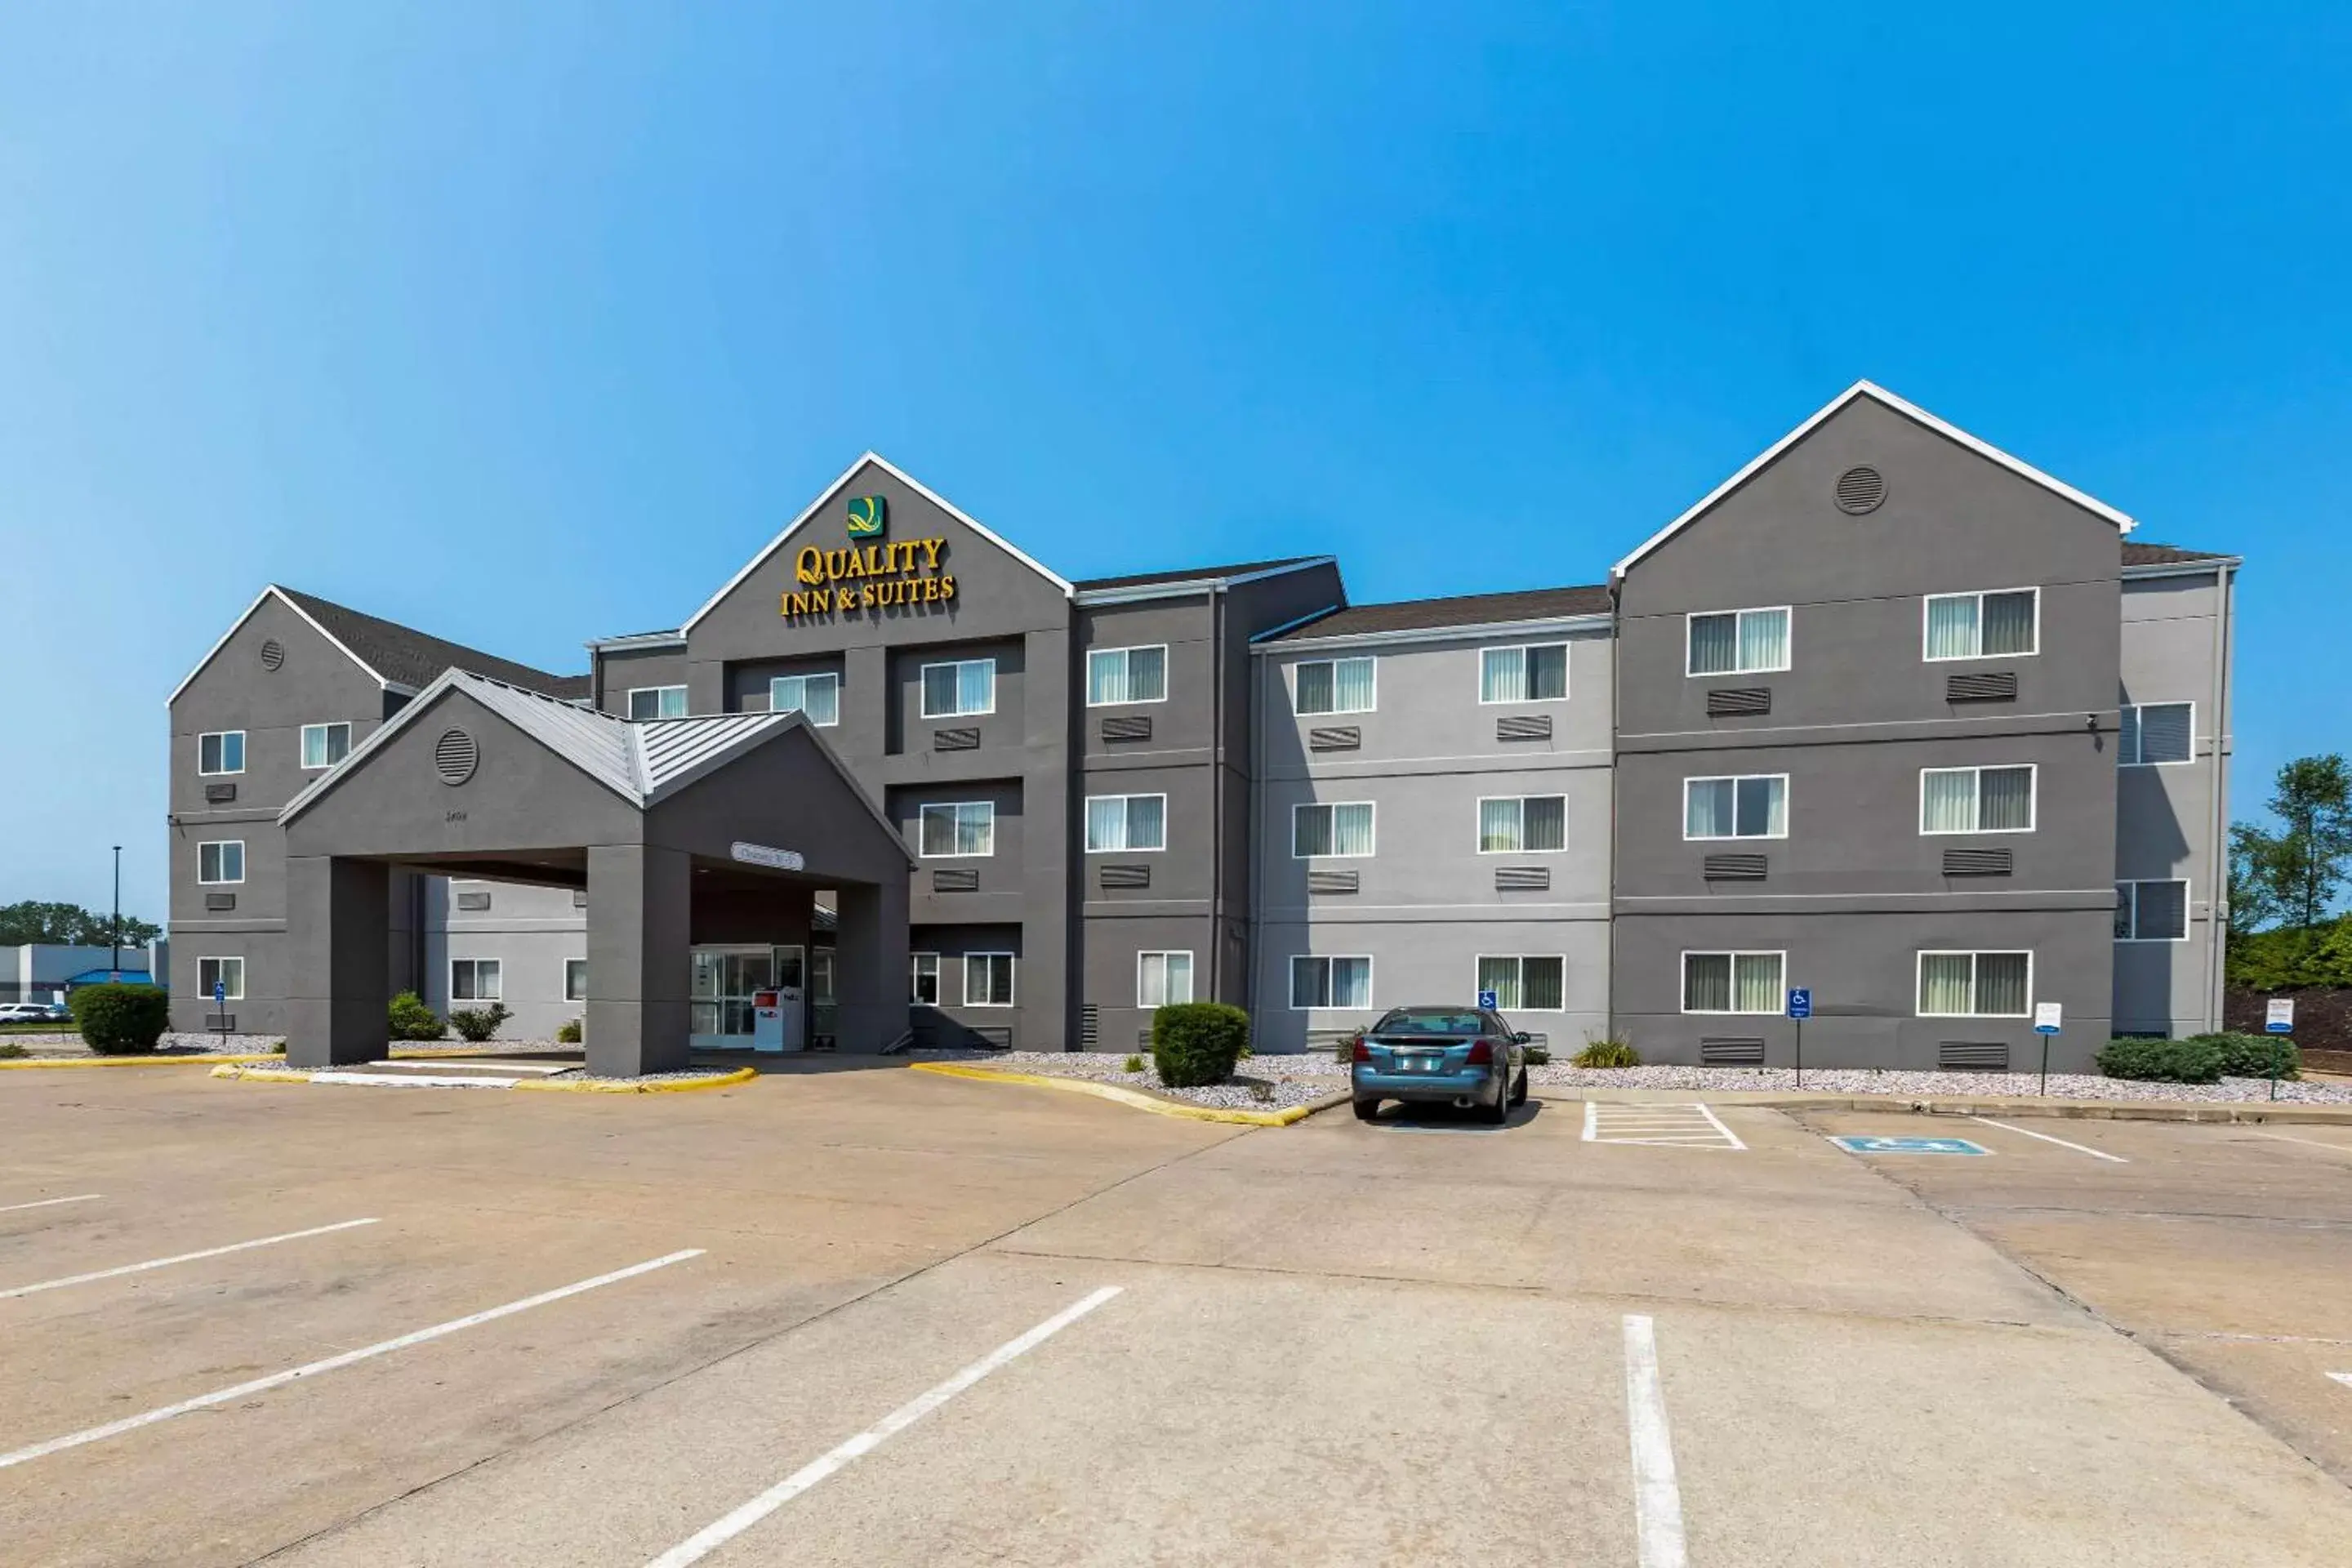 Property Building in Quality Inn & Suites Keokuk North